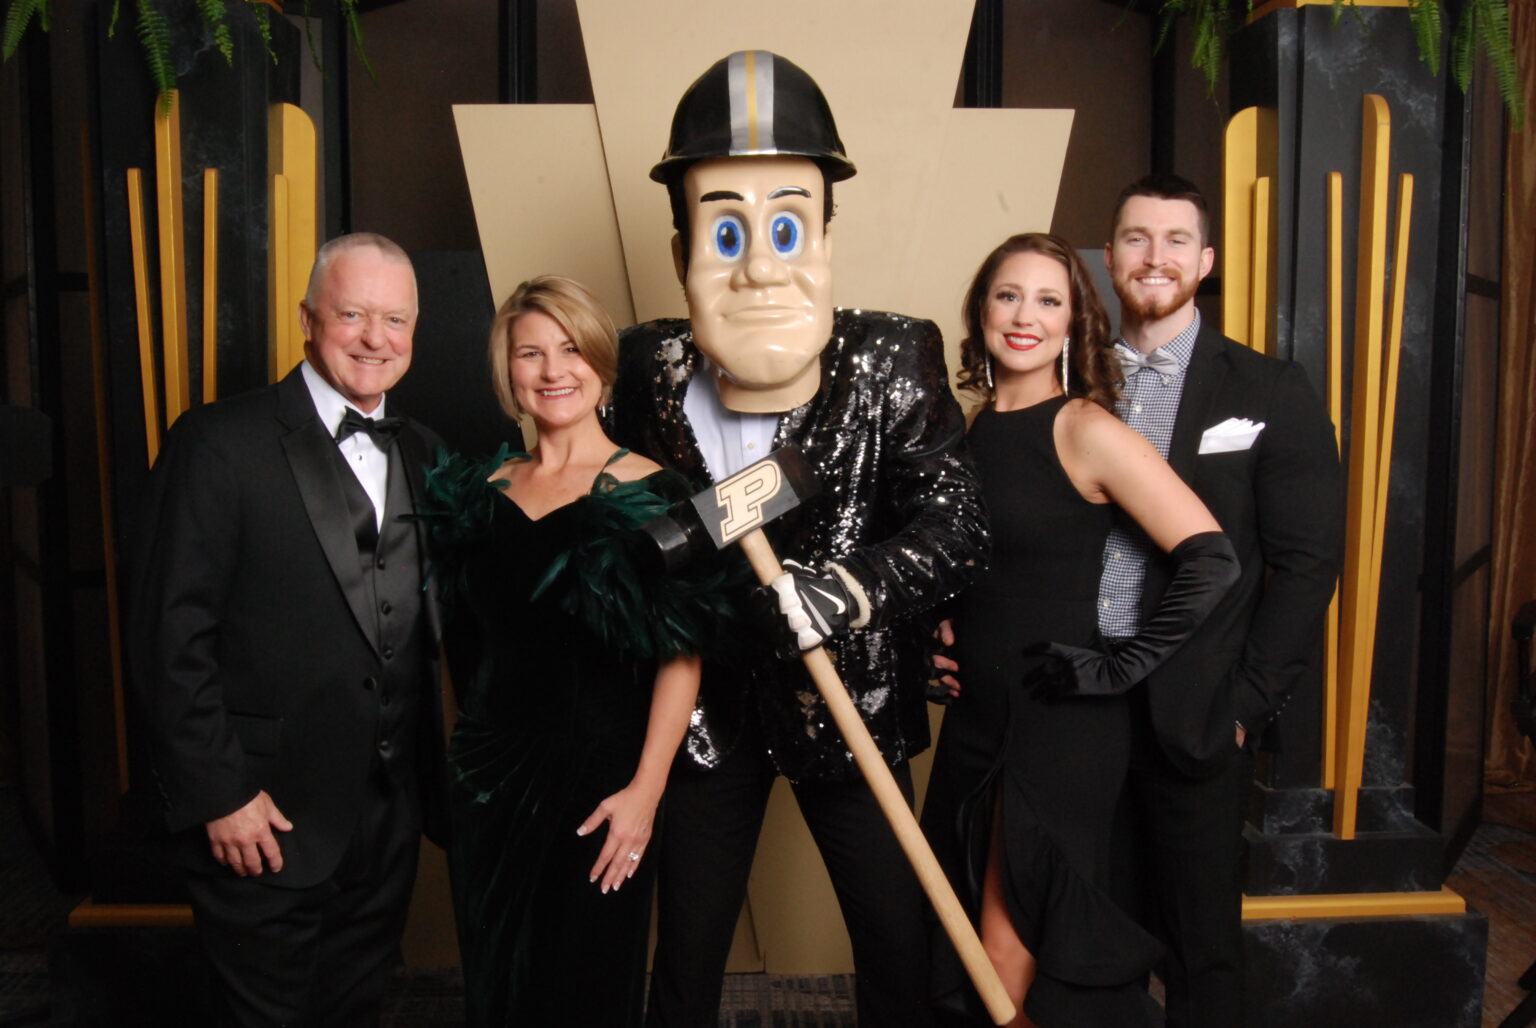 Boilermaker Ball Purdue for Life Foundation